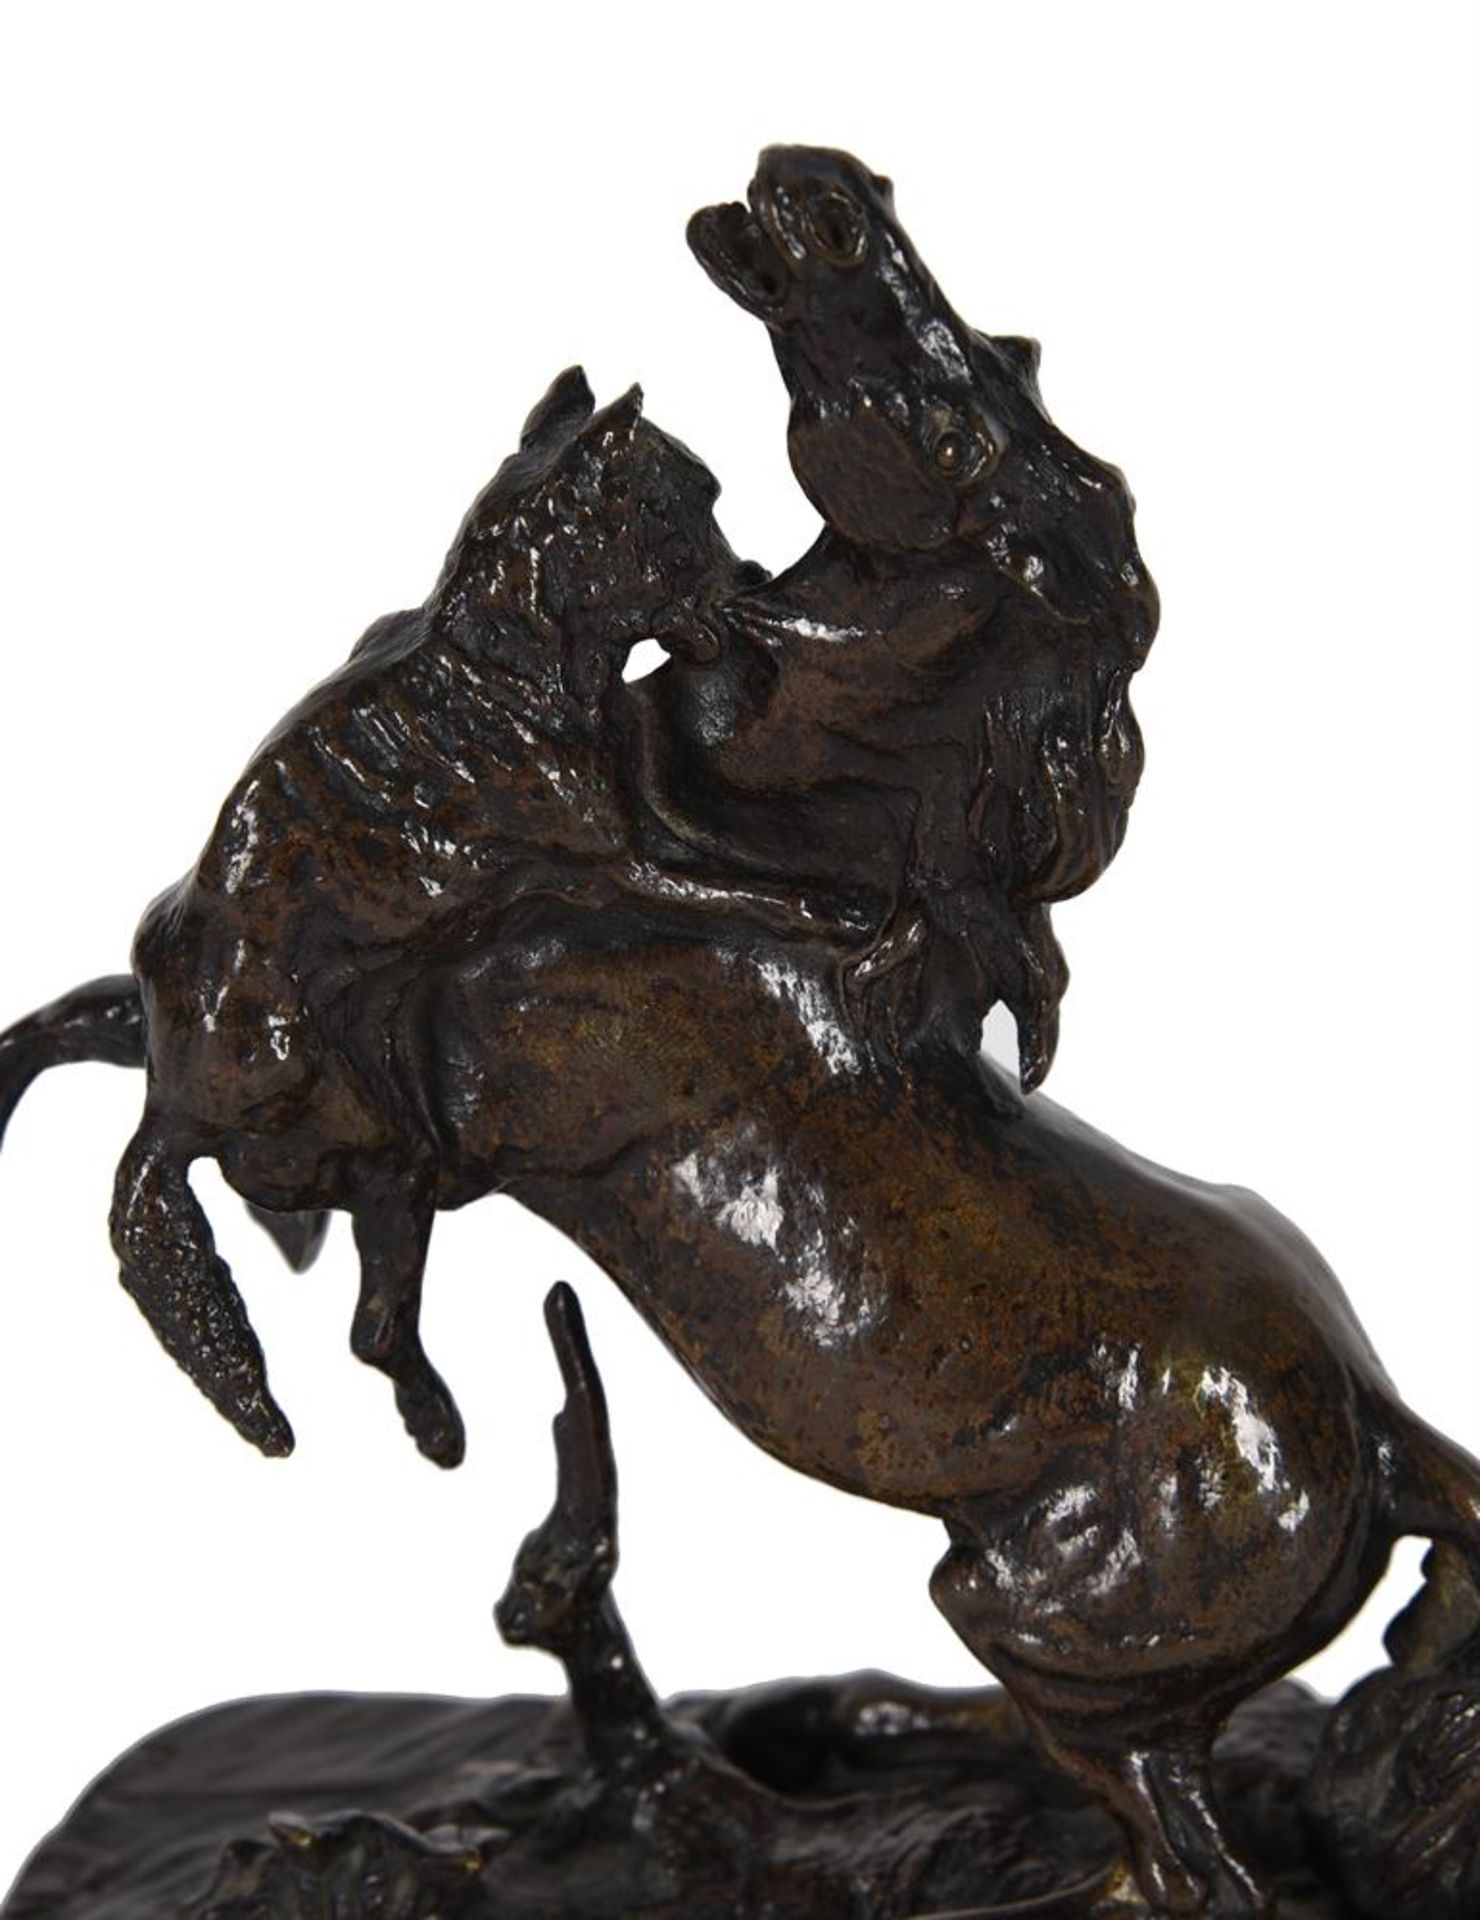 PIERRE-JULES MÊNE (1810-1879), A RARE BRONZE FIGURE OF REYNARD/LOUP ET CHEVAL, FRENCH, LATE 19TH CEN - Image 4 of 4